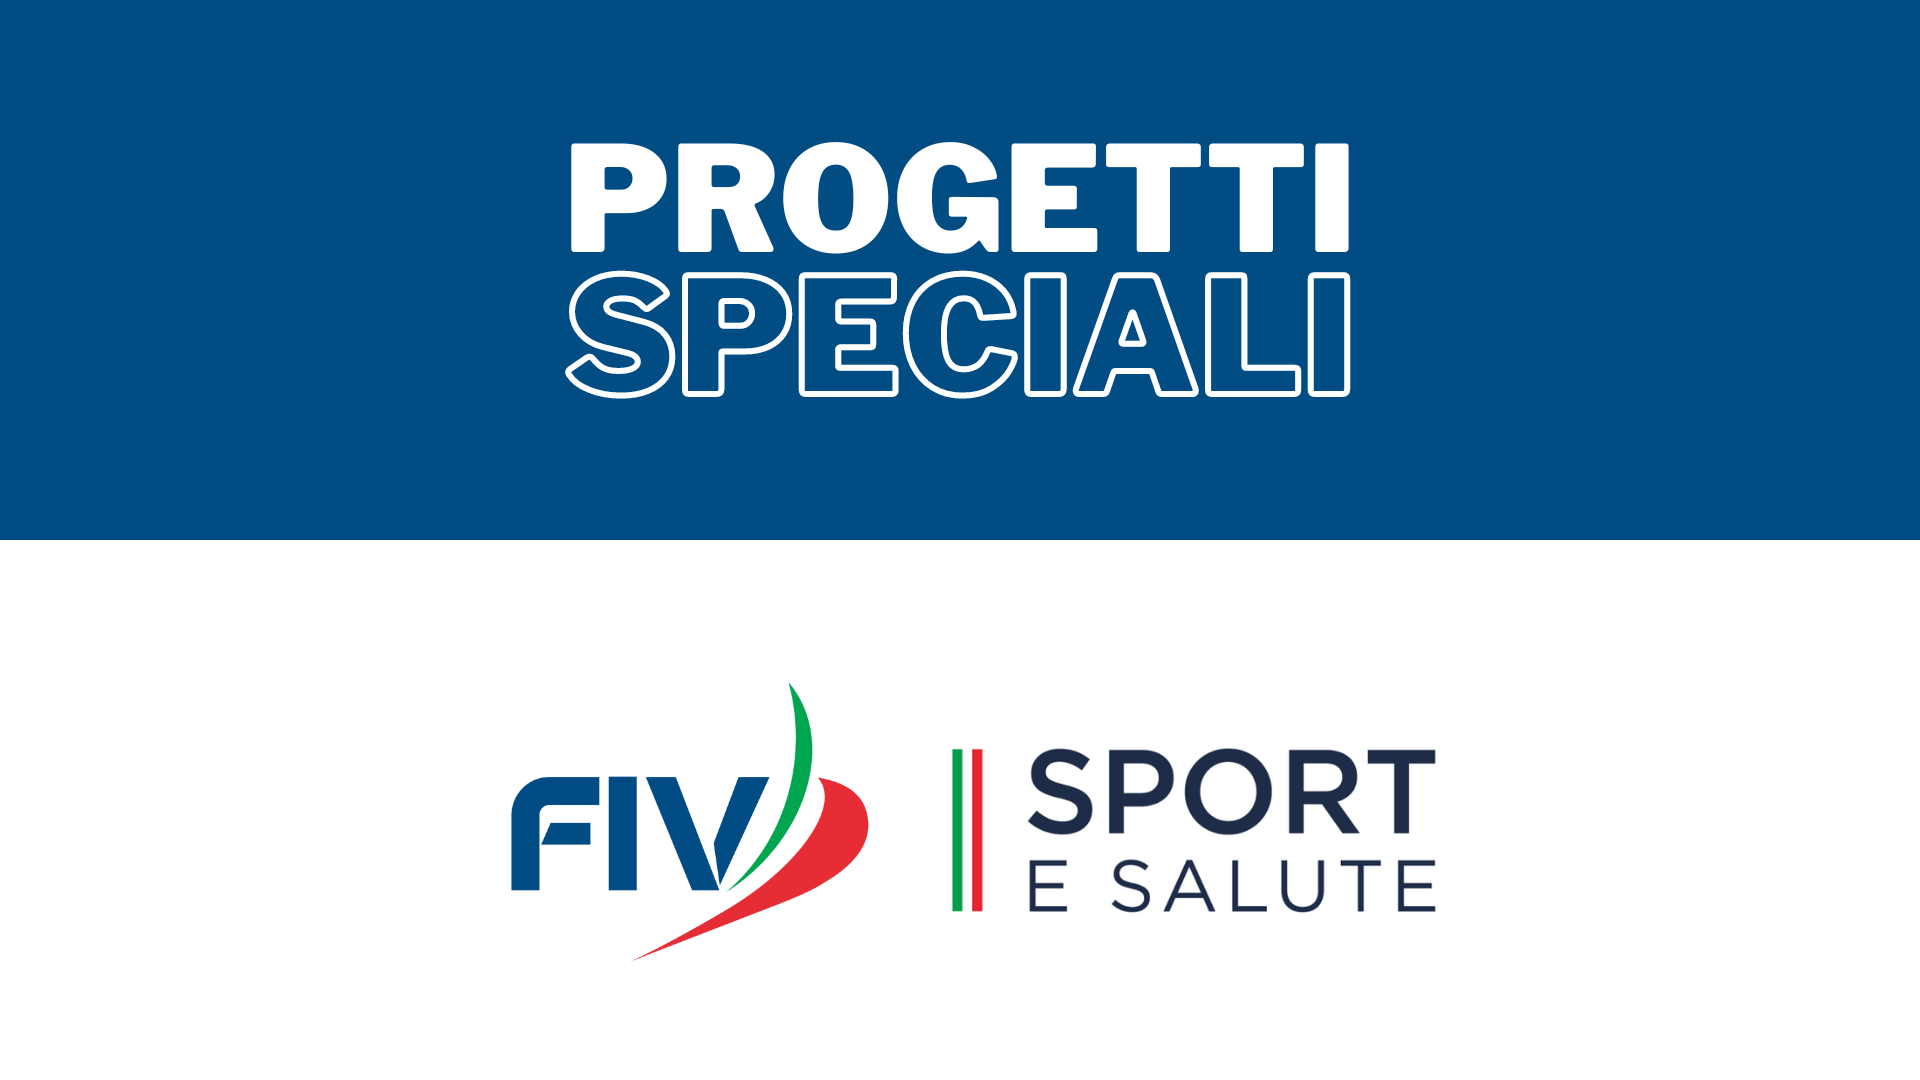 images/Progetti_Speciali_FIV.png